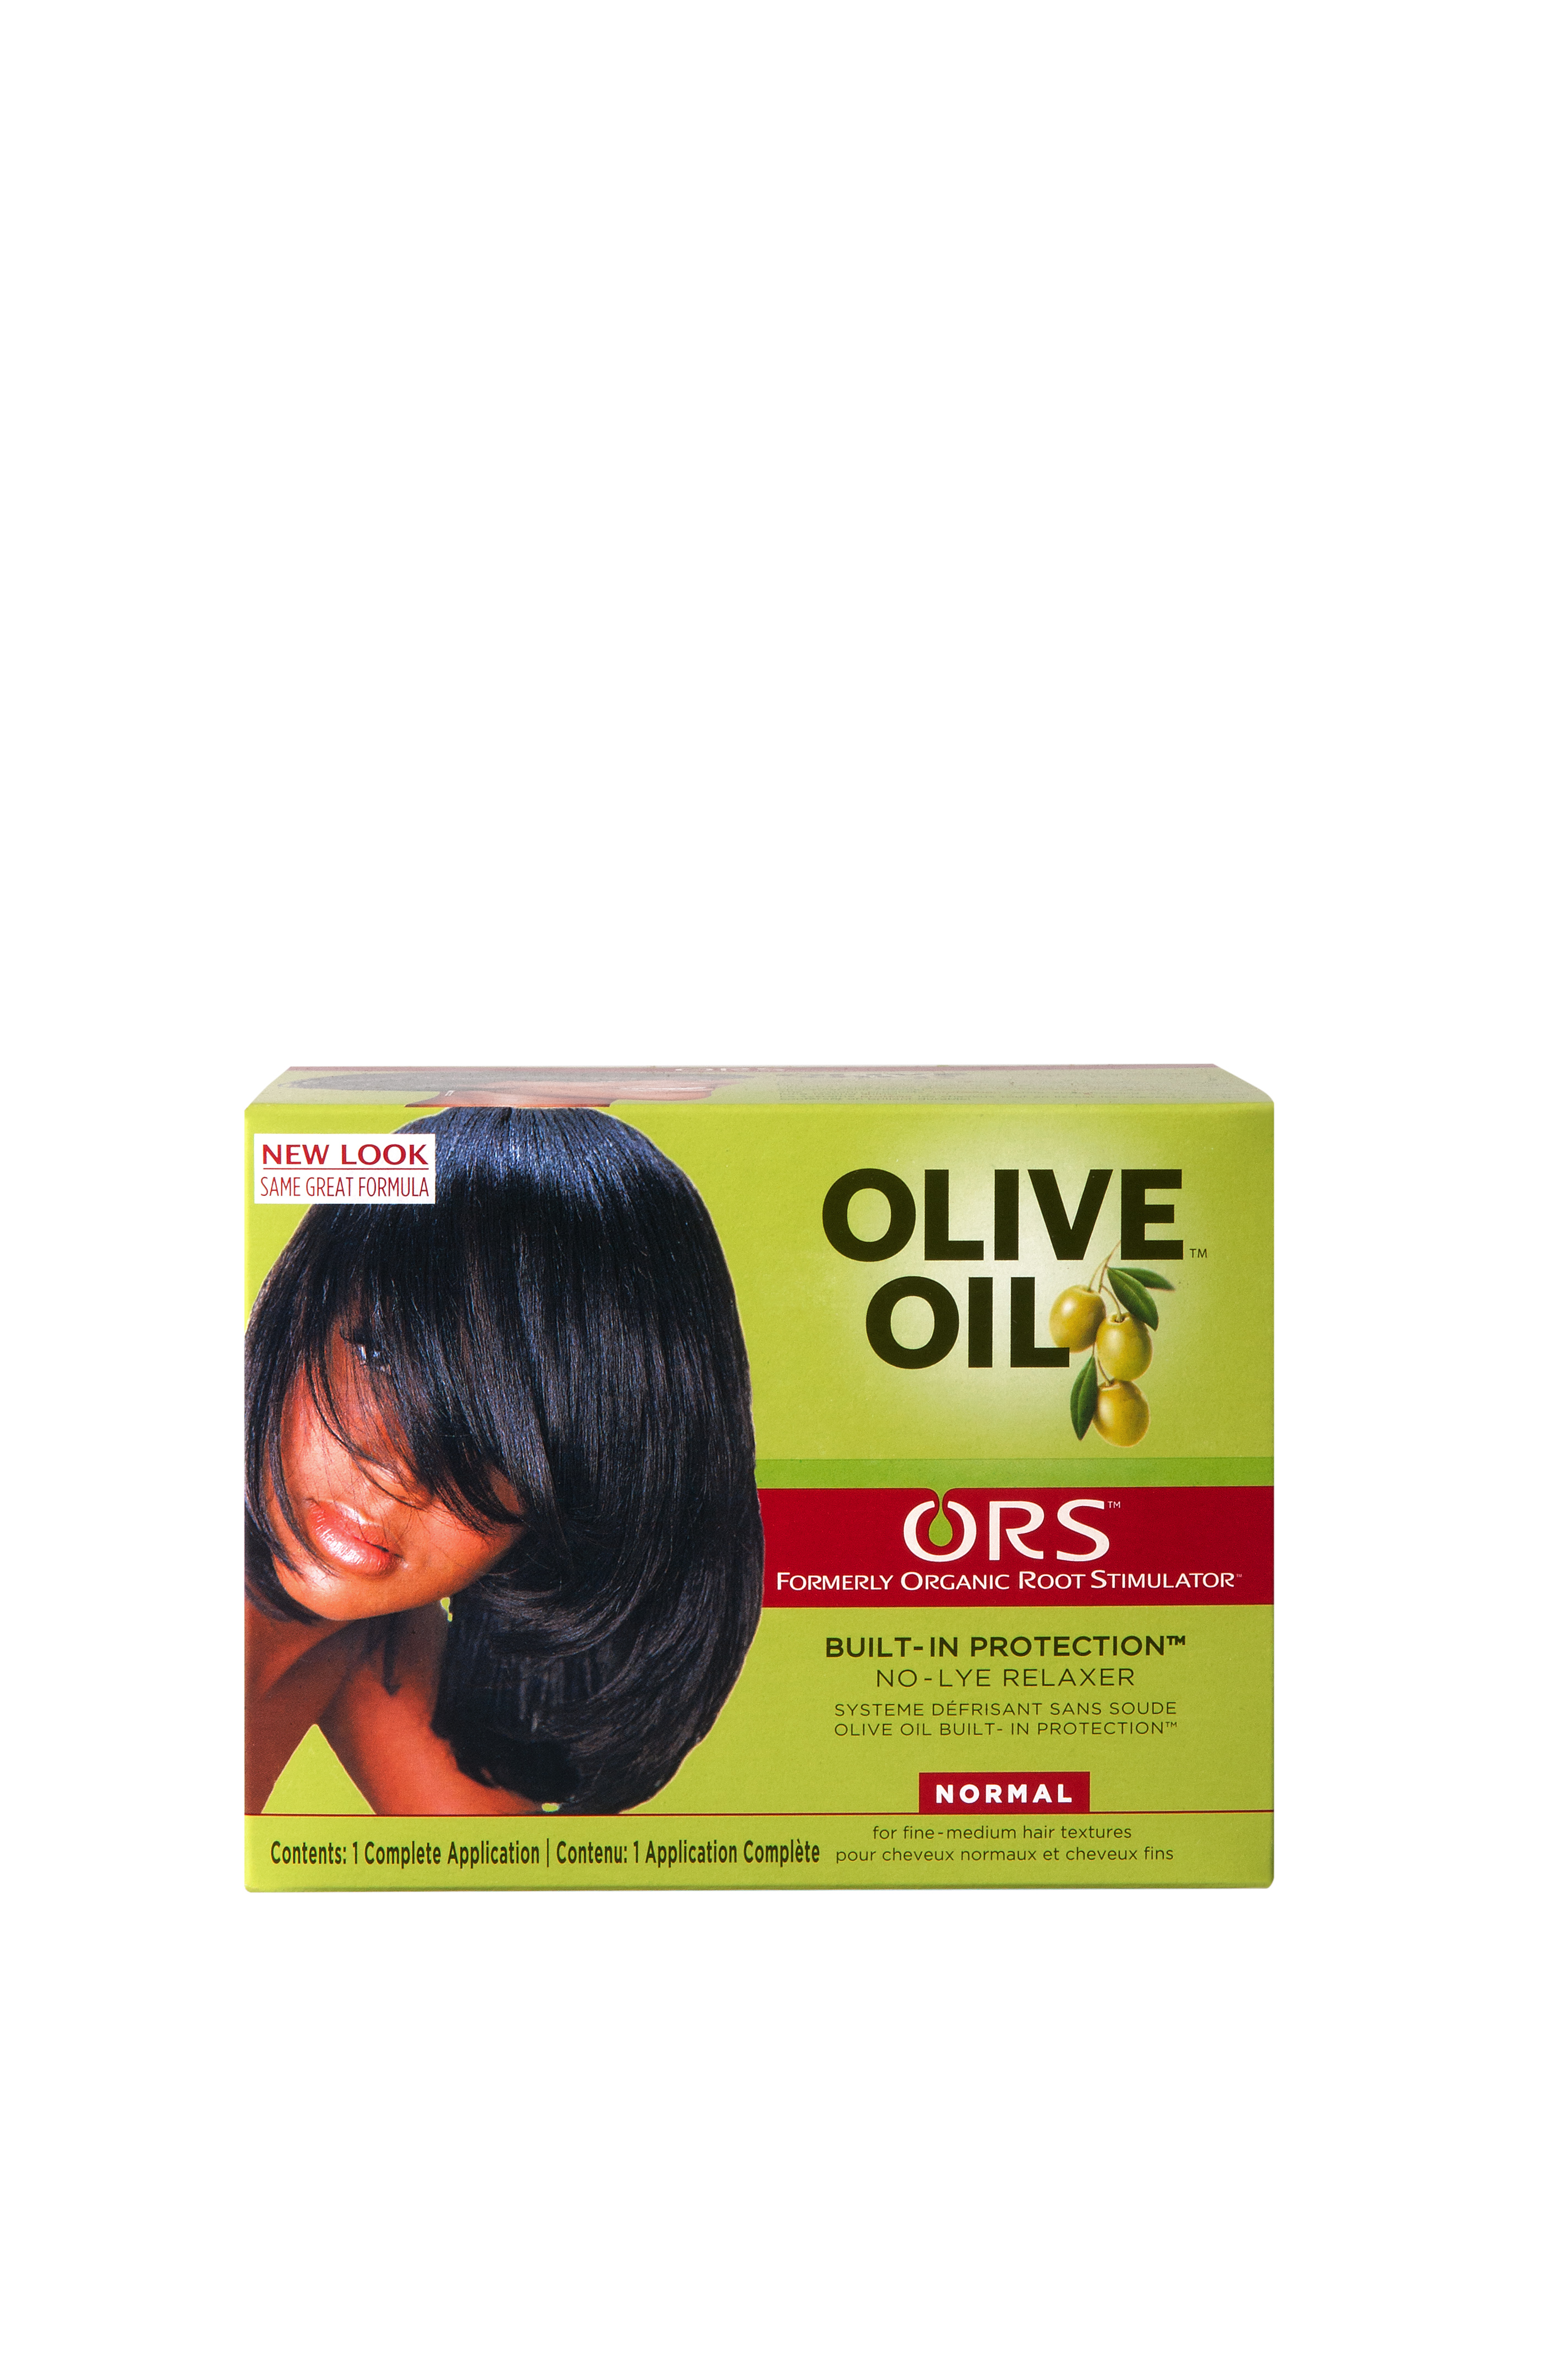 Organic Root Stimulator No-Lye Relaxer, Built-In Protection, Normal, Olive Oil, 1 Application